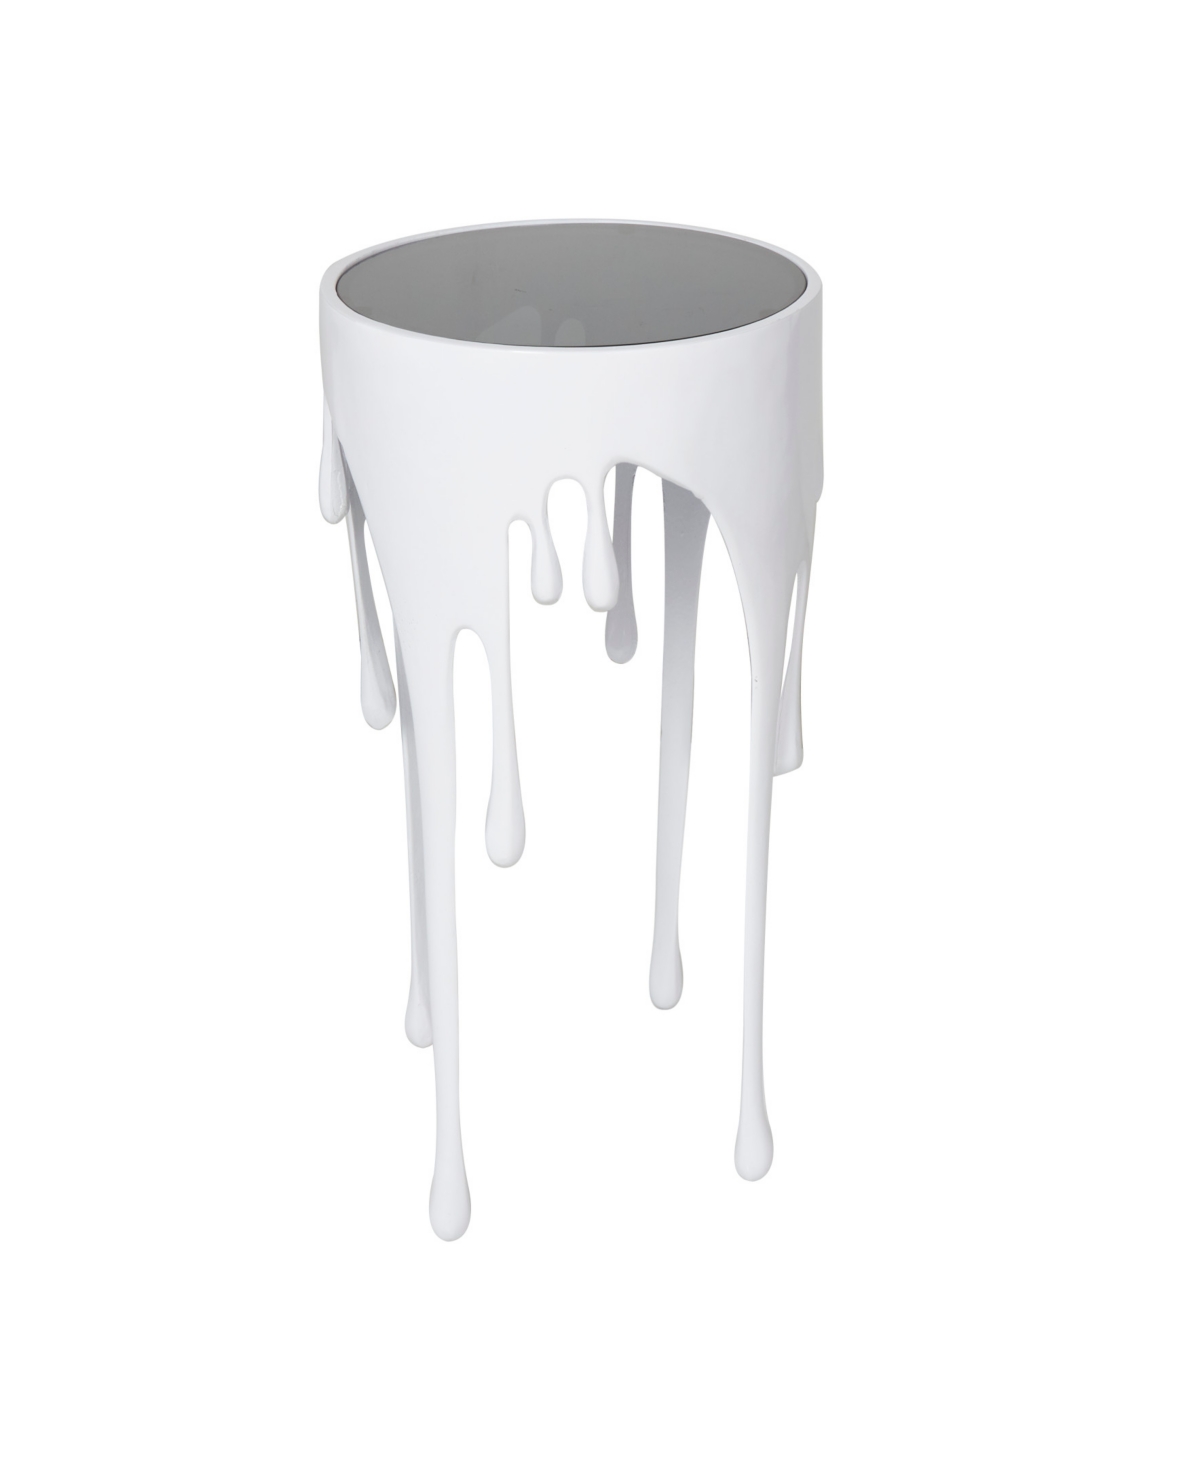 Rosemary Lane Aluminum Drip Accent Table With Melting Design And Shaded Glass Top, 16" X 16" X 25" In White